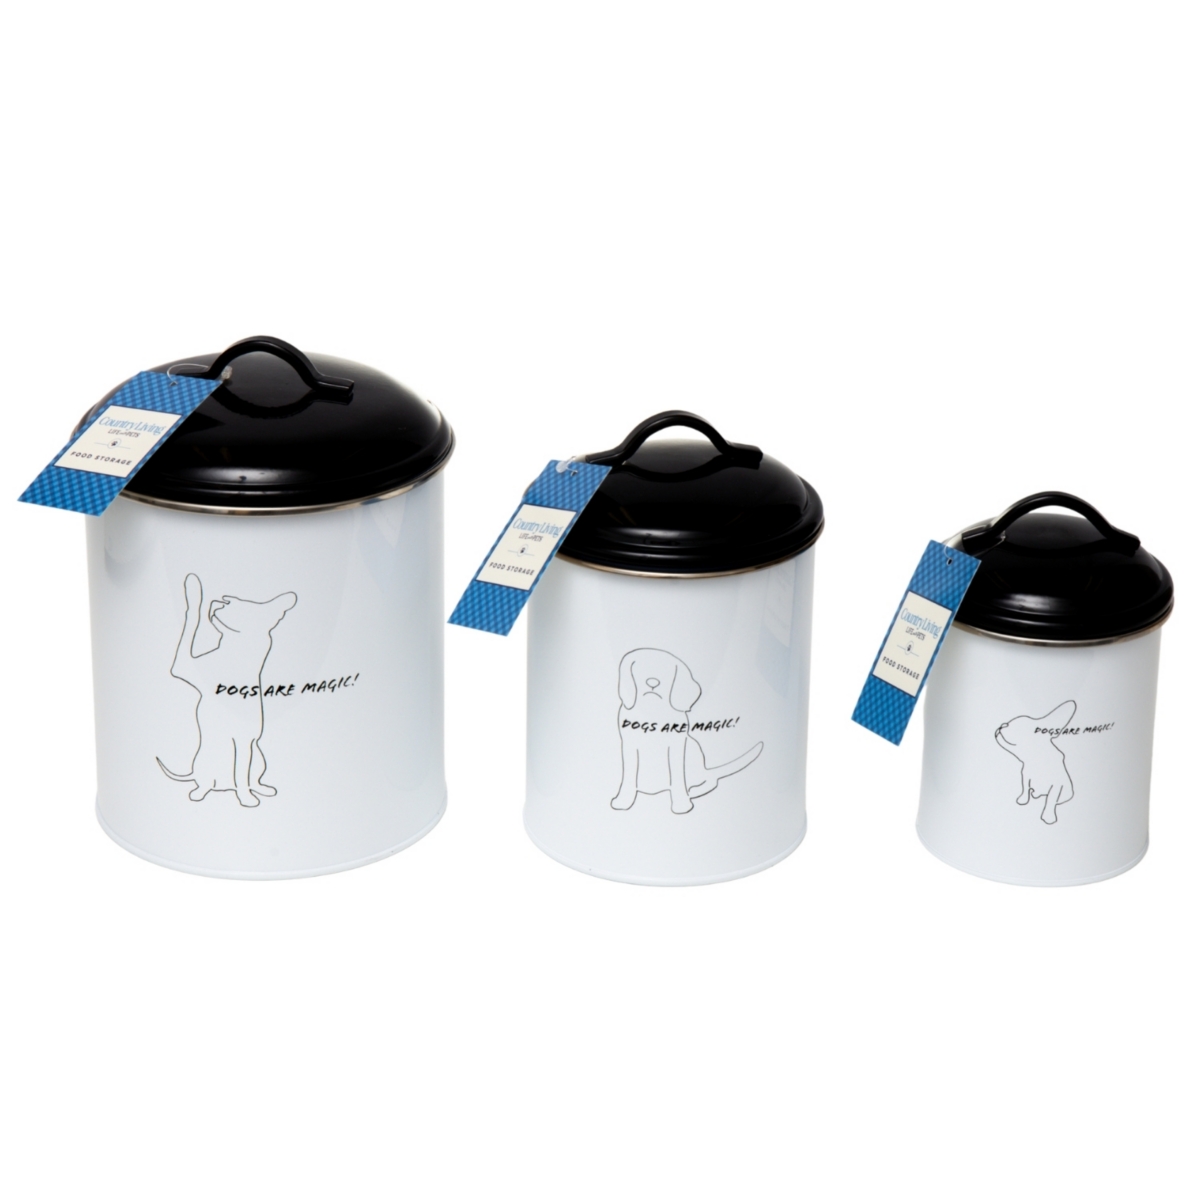 Country Living 3-Piece Black and White Pet Treat Storage Set - Assorted Pre-pack